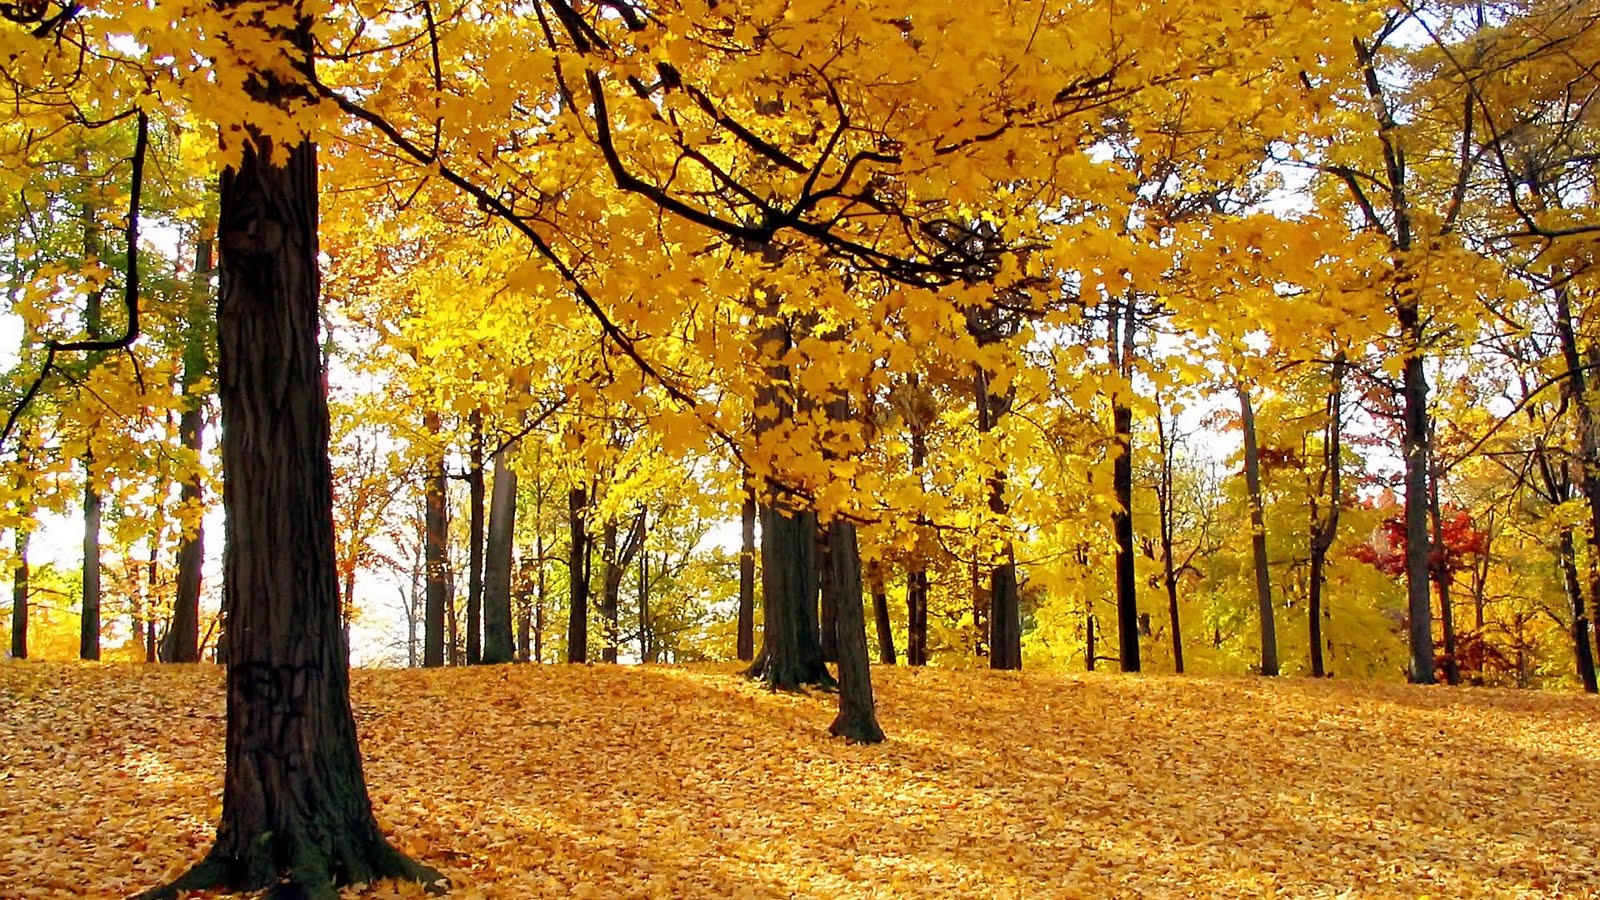 Nature-Images HD Wallpapers 1905| Autumn trees p full widescreen ...